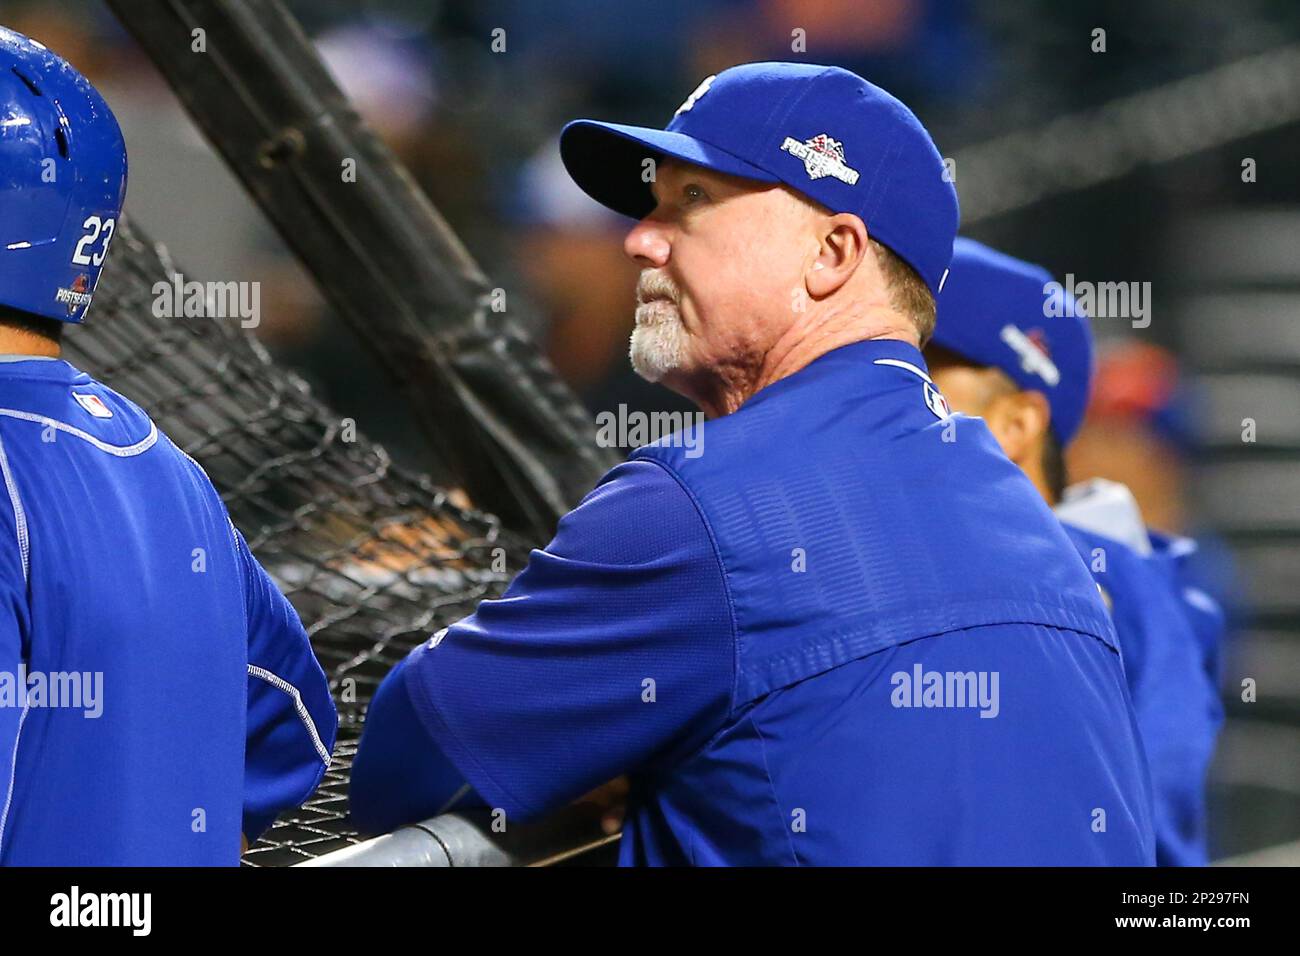 13 OCT 2015: Los Angeles Dodgers batting coach Mark McGwire (25) during  batting practice prior to Game 4 of the NLDS between the New York Mets and  the Los Angeles Dodgers played